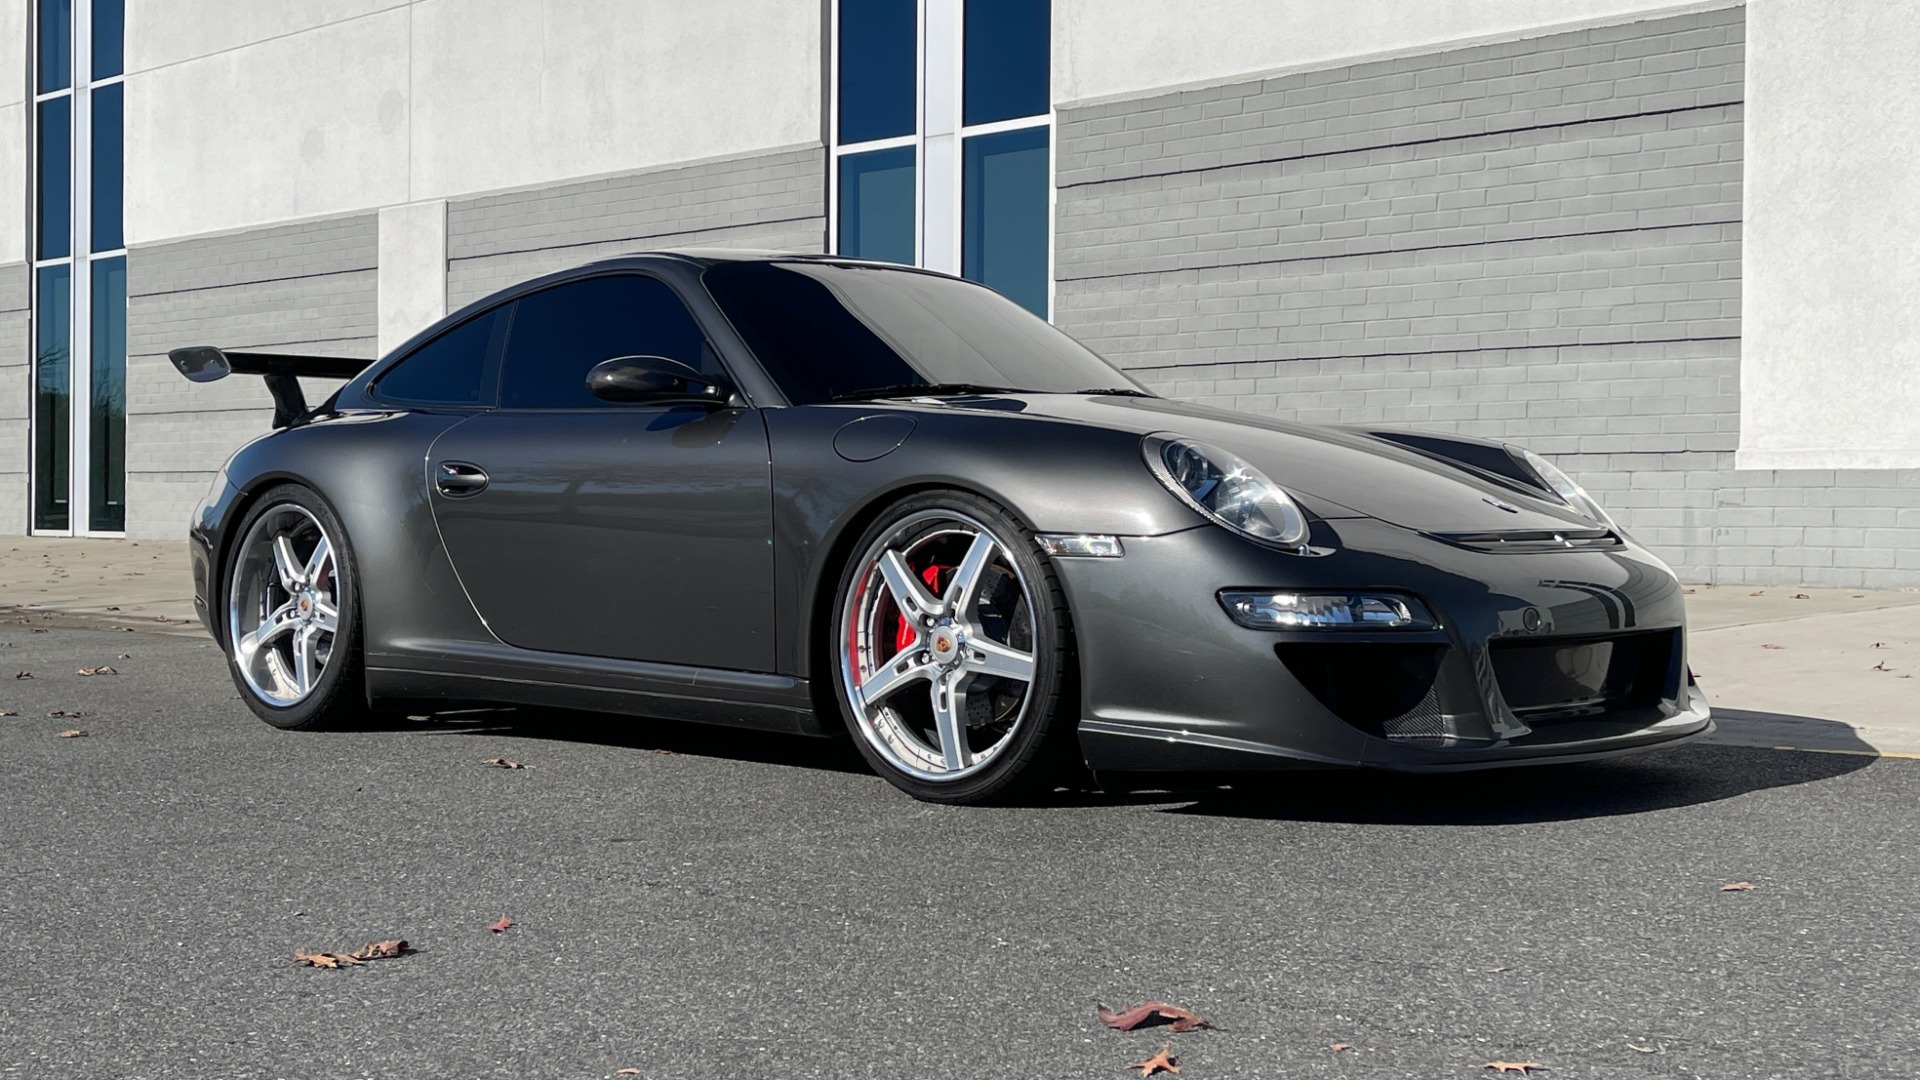 Used 2007 Porsche 911 CARRERA 4S / 3.8L H6 / 6-SPD MANUAL / HTD STS / SPORT CHRONO / BODY KIT for sale Sold at Formula Imports in Charlotte NC 28227 5